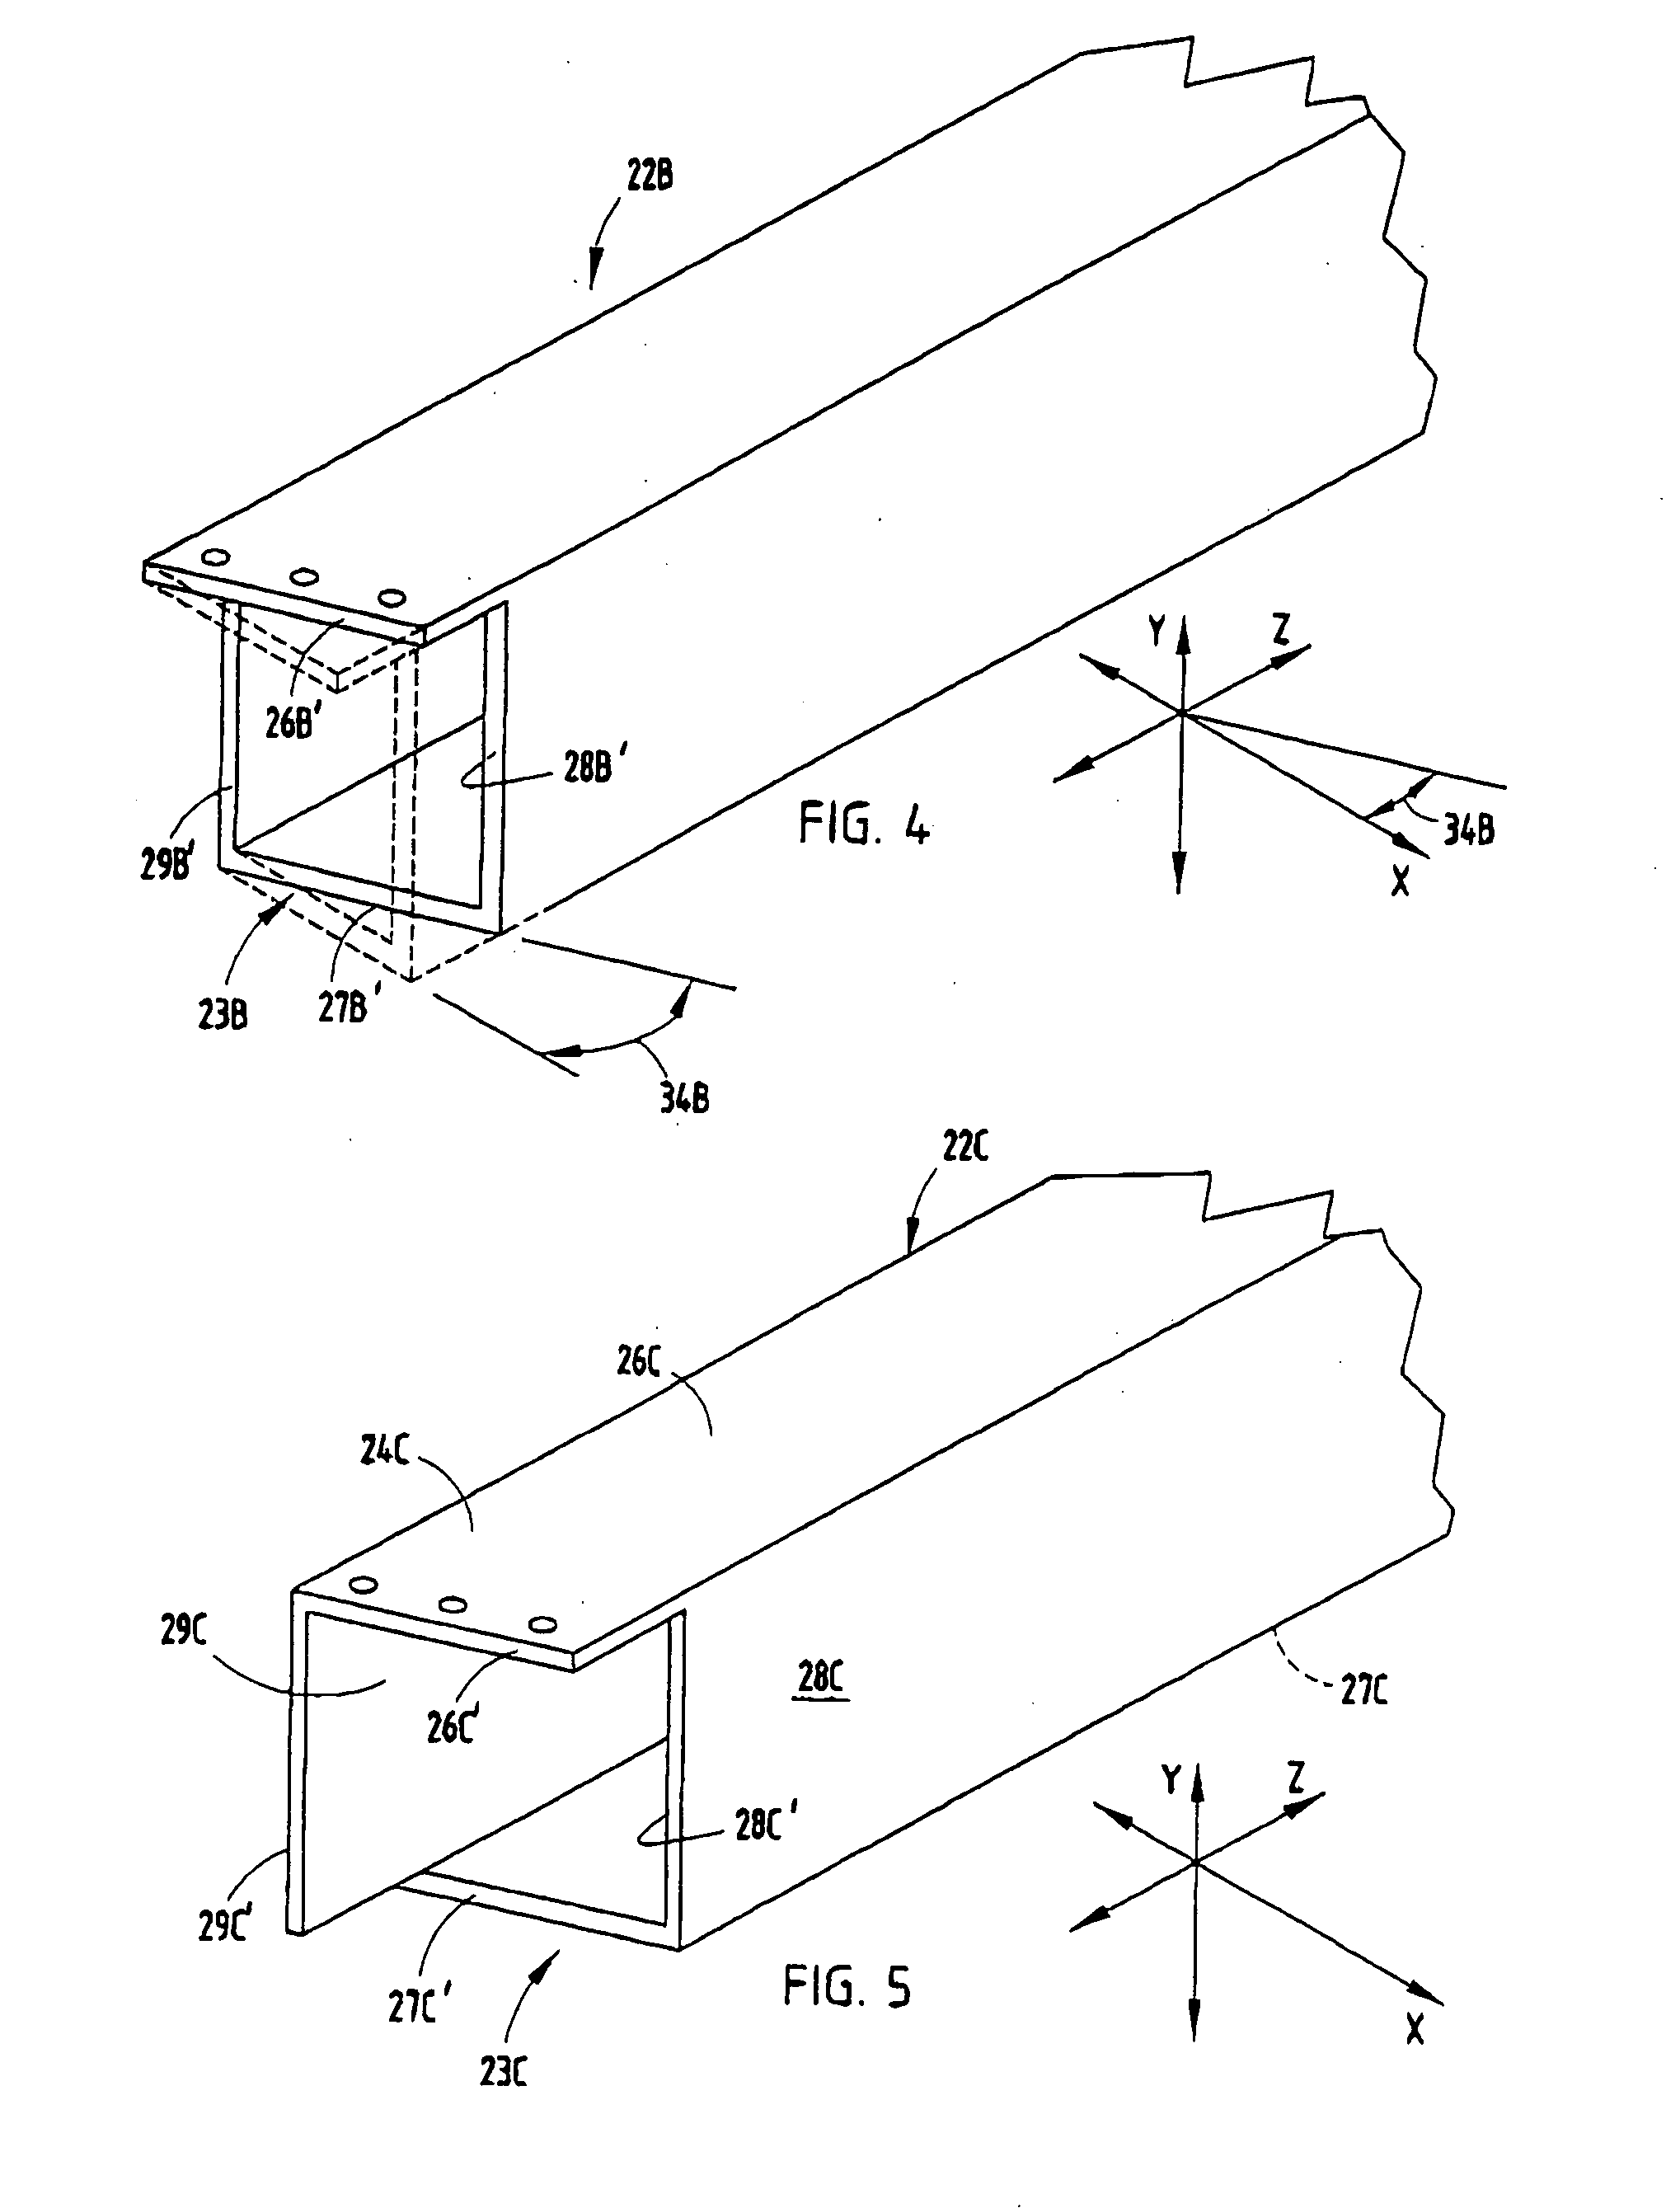 Building structure with purlin to beam connection